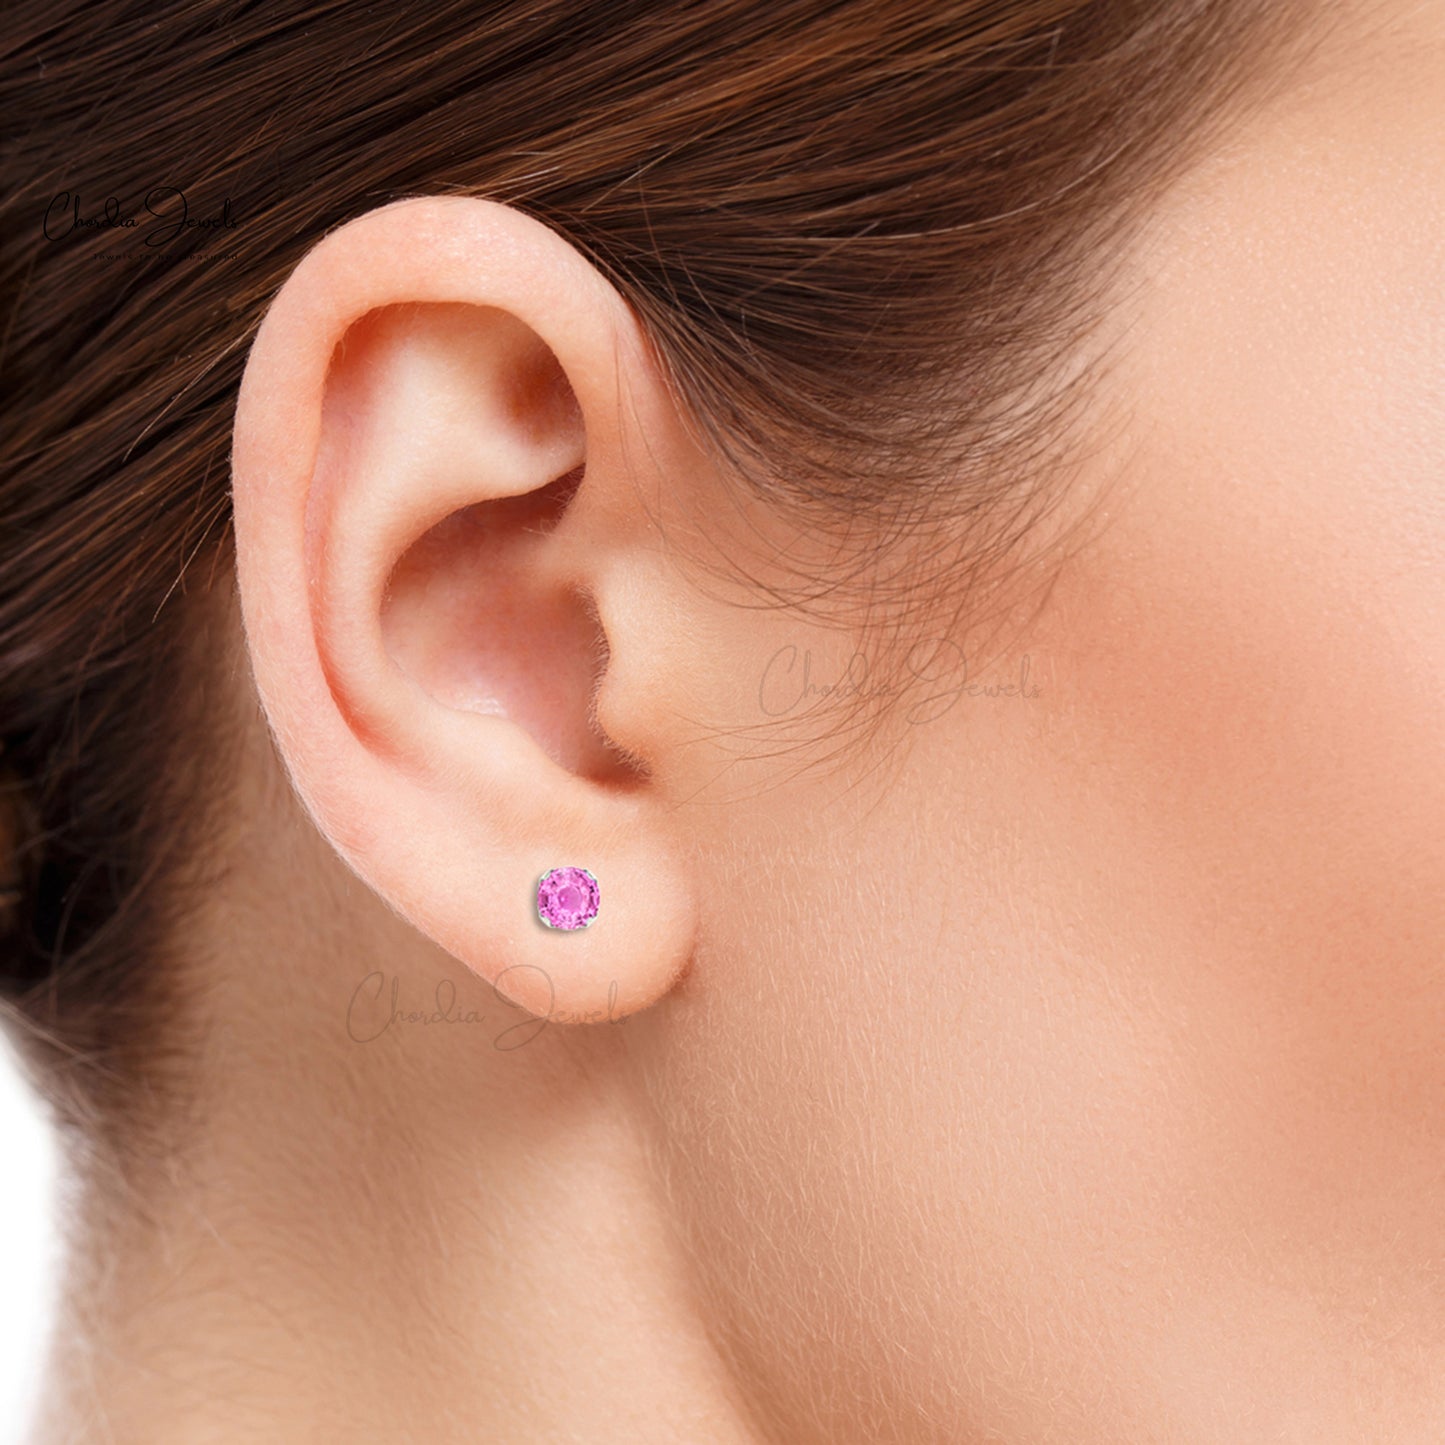 AAA Pink Sapphire Earrings For Gift 14k Real Gold Earrings Set 4mm Round Cut Gemstone Studs Hallmarked Jewelry